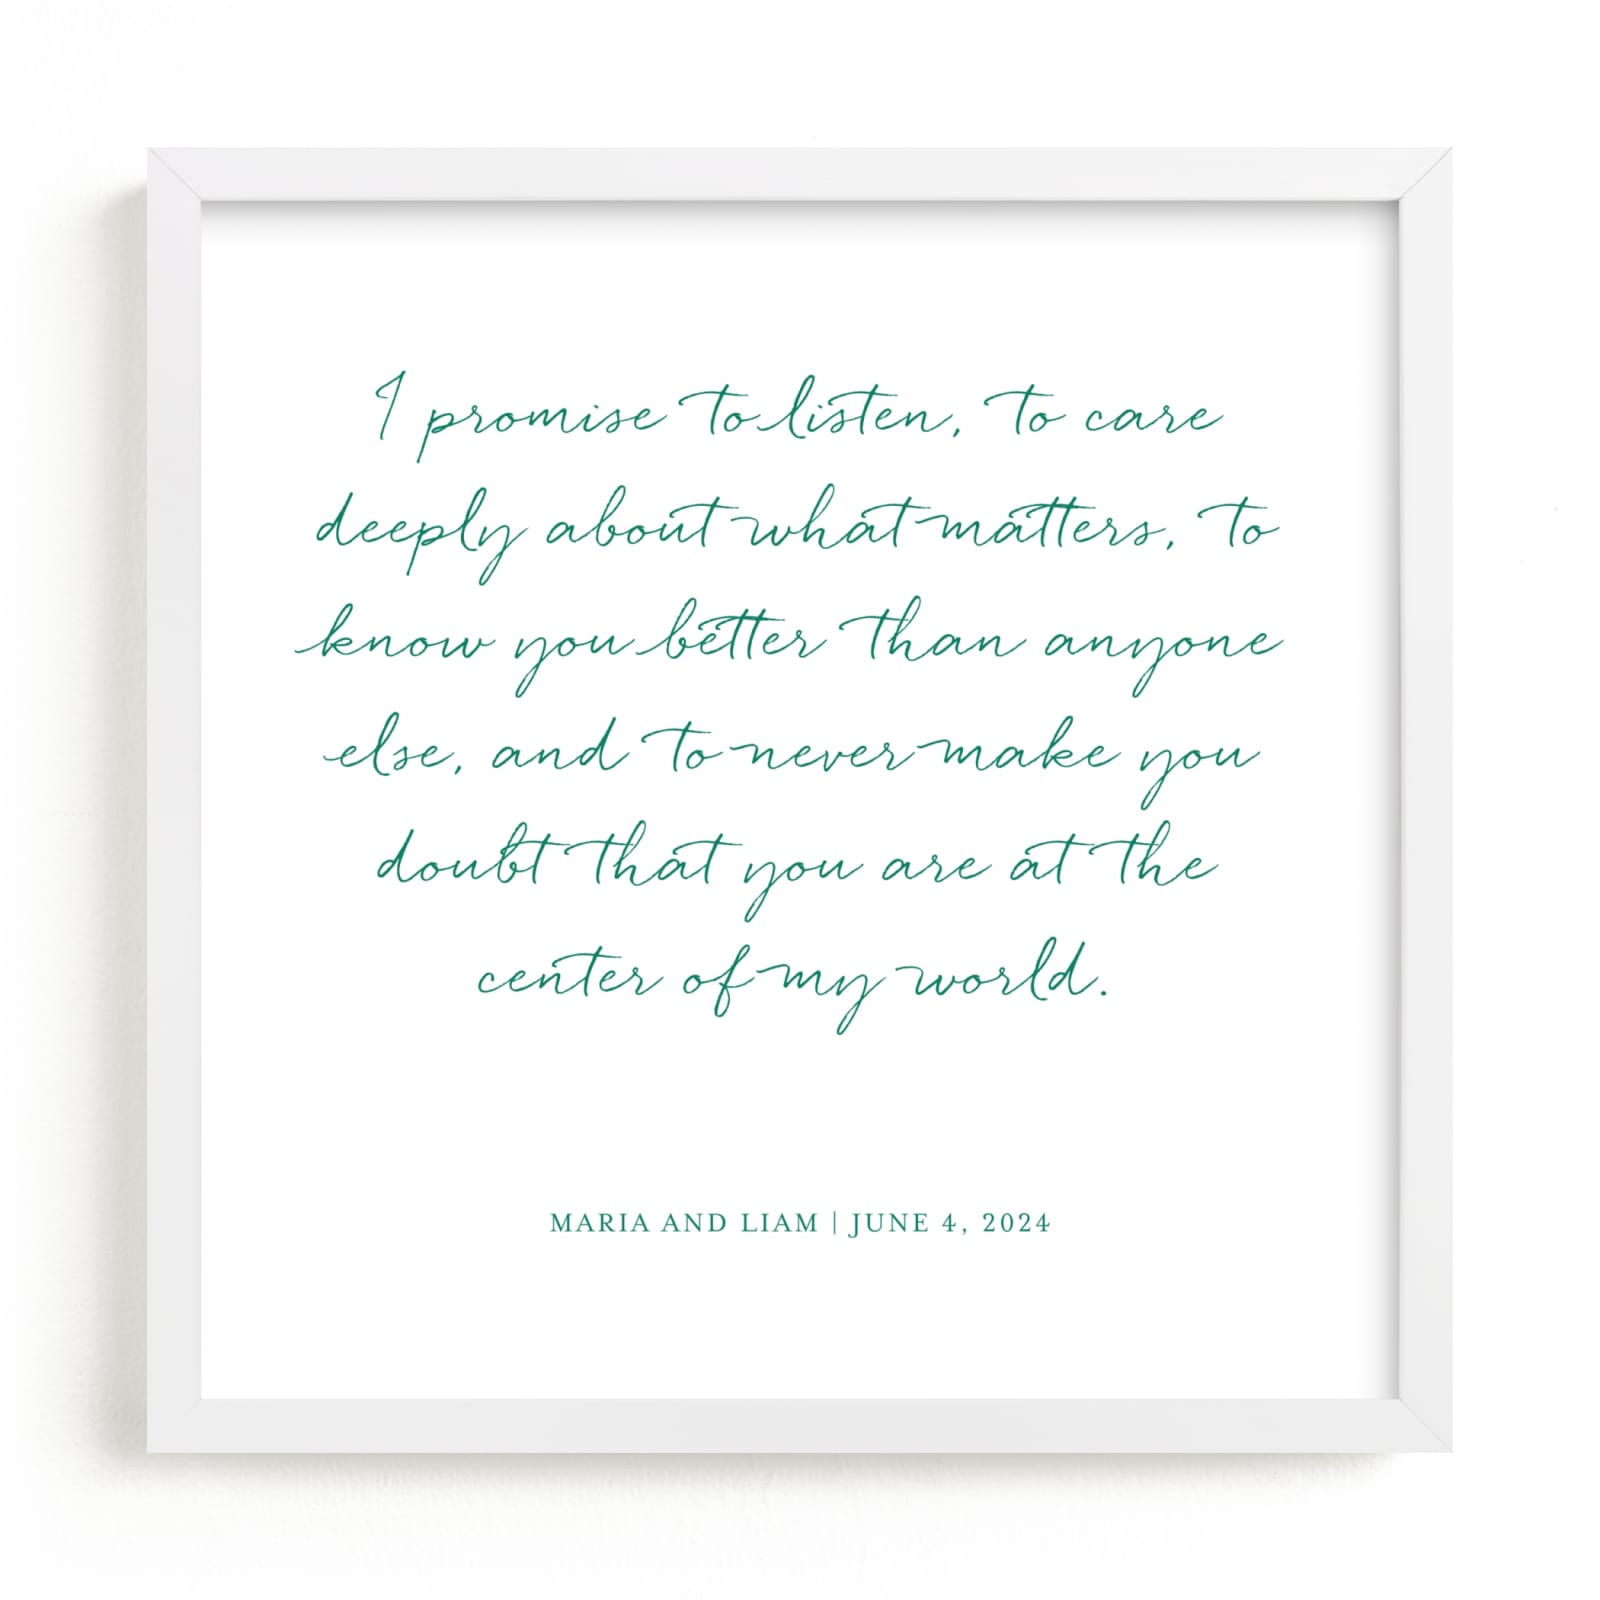 This is a green photos to art  by Minted called Your Vows as an Art Print.